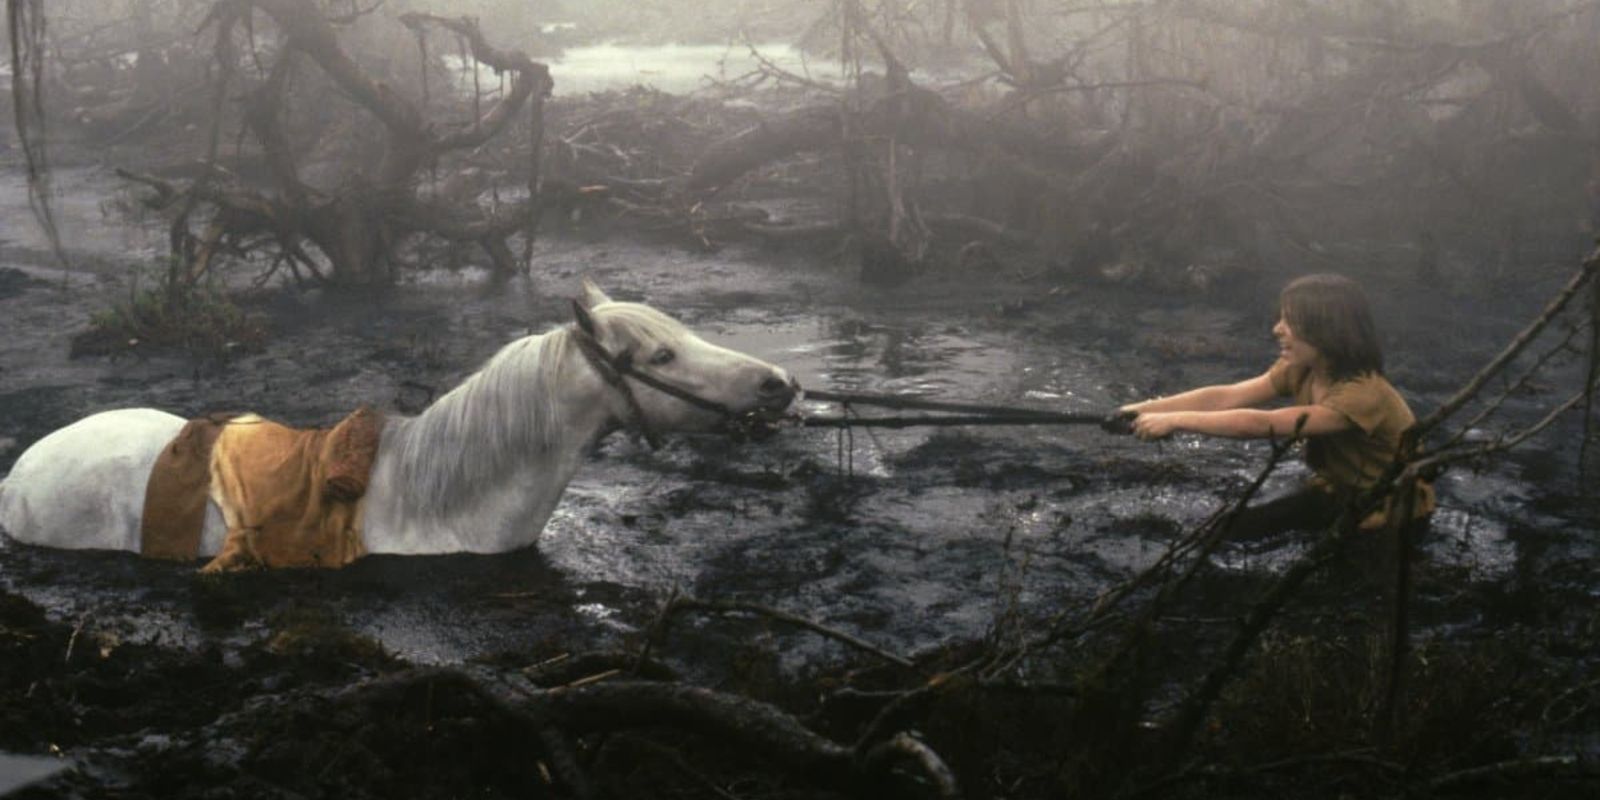 Atreyu attempting to save Artax in The Neverending Story